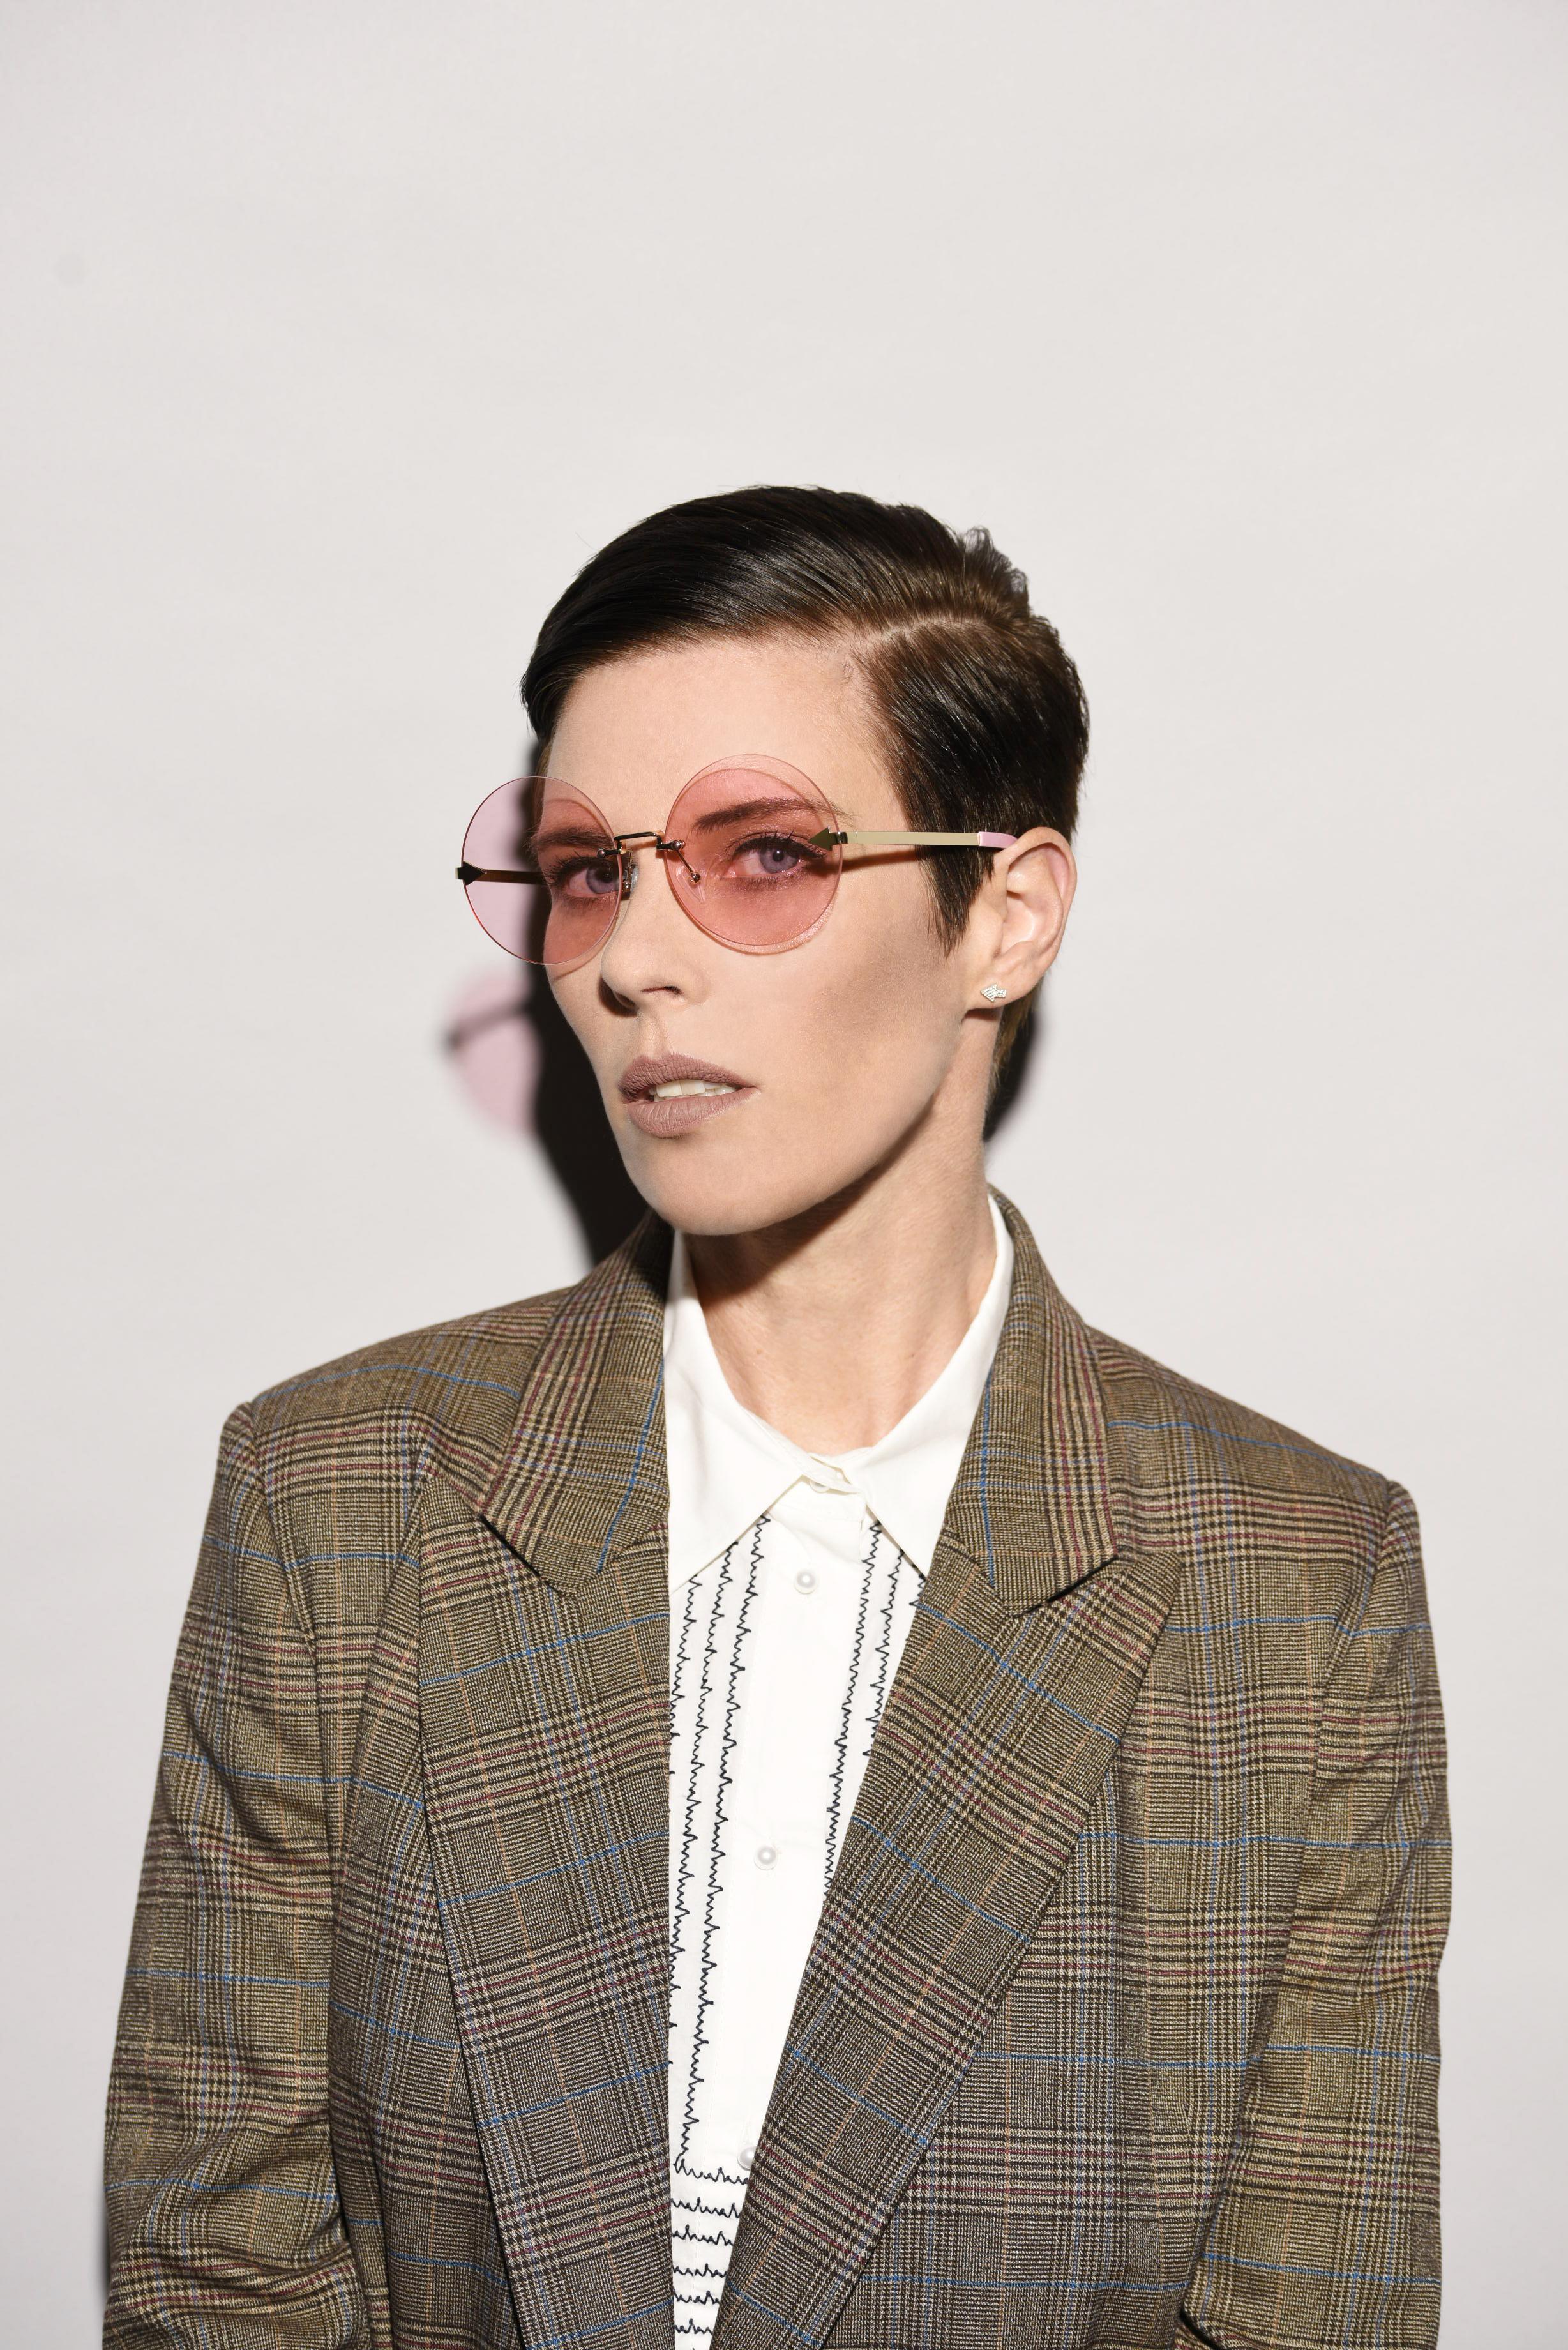 10 Things You Don't Know About...Karen Walker